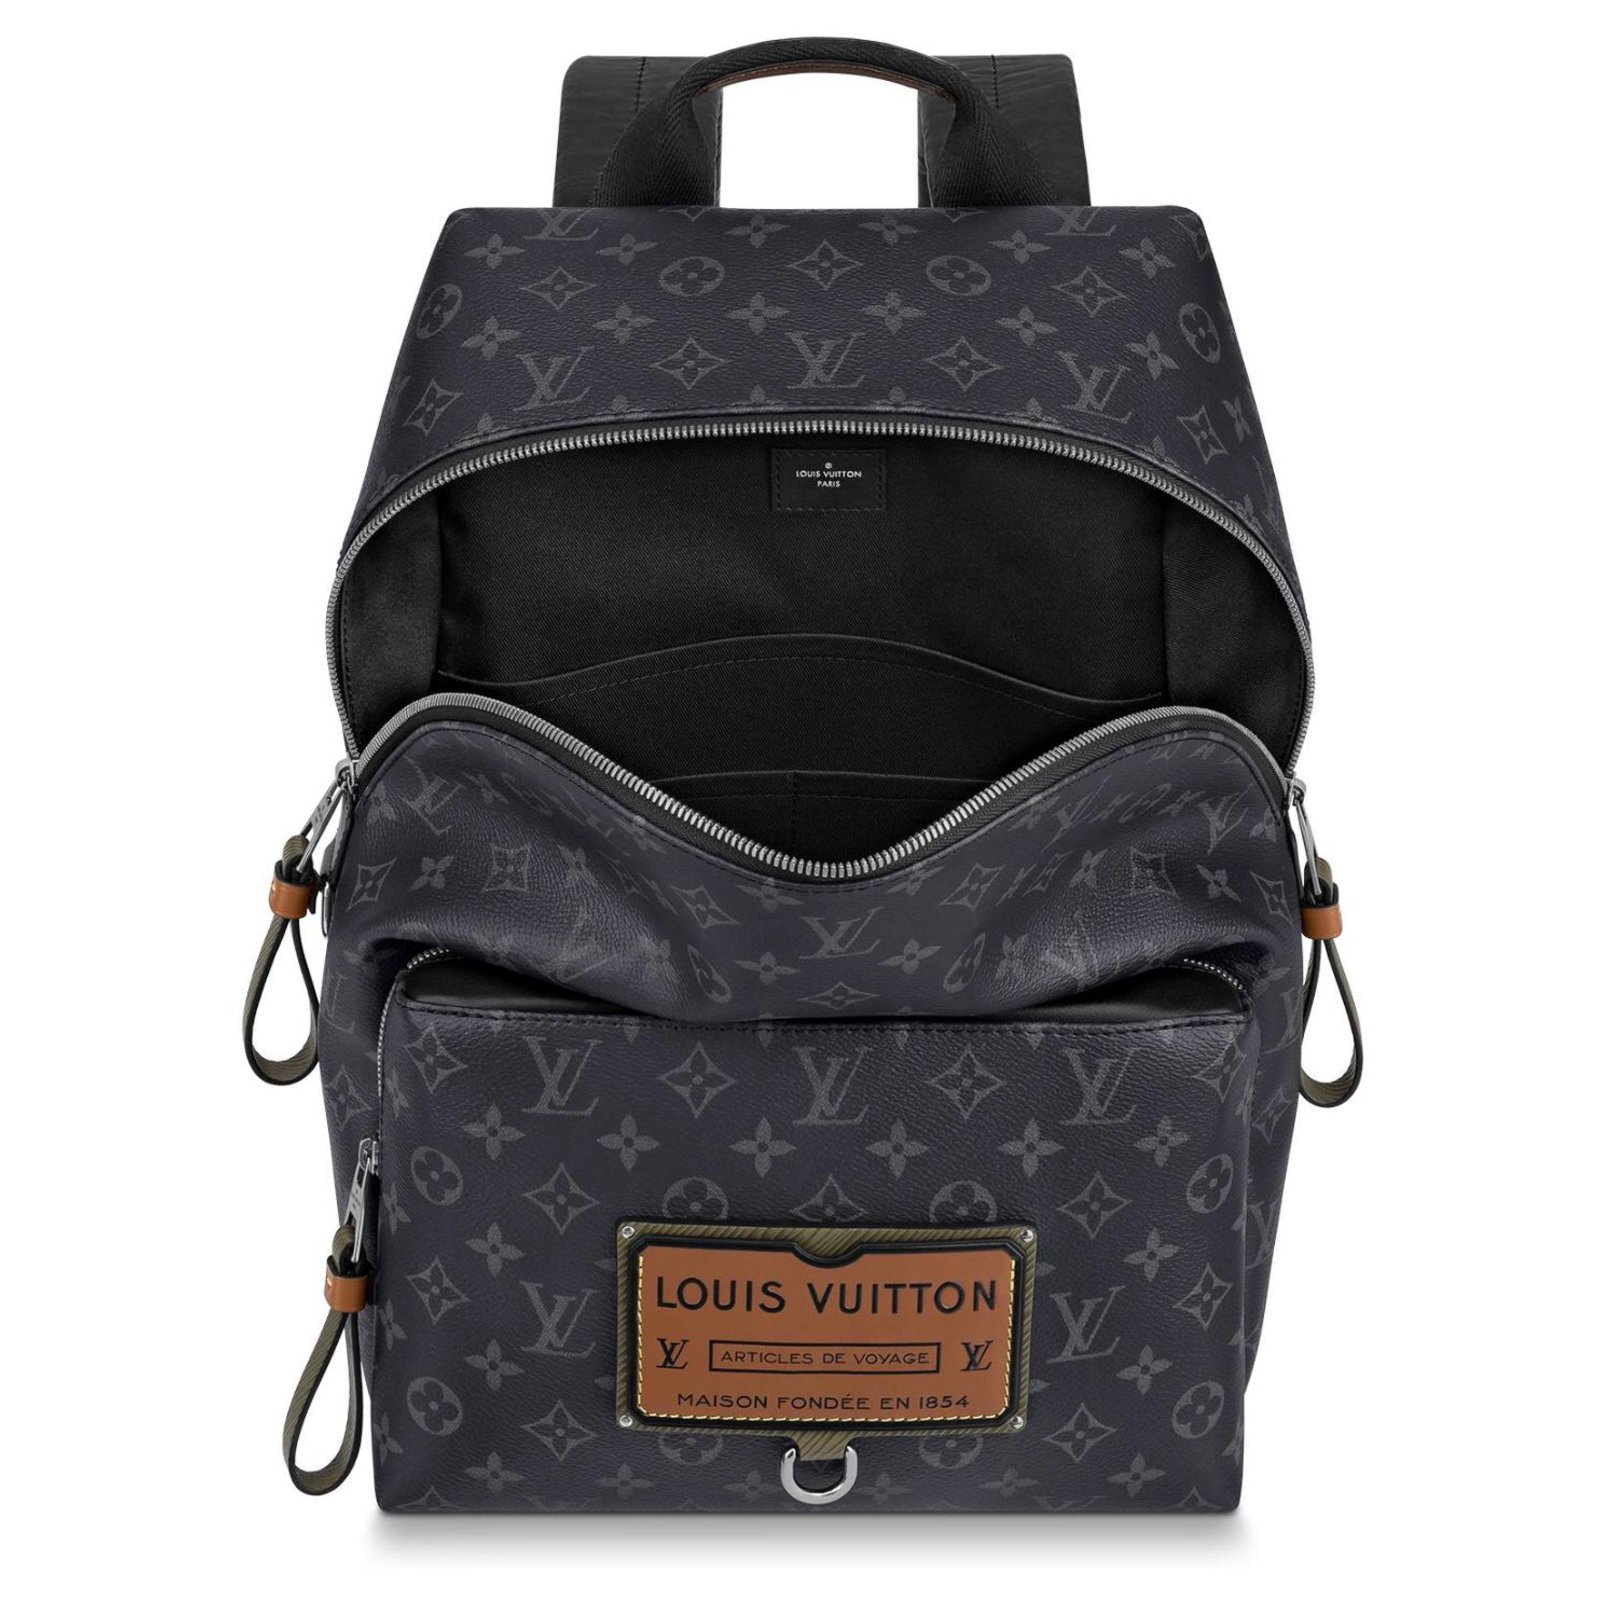 Louis Vuitton Discovery Backpack in Orange for Men